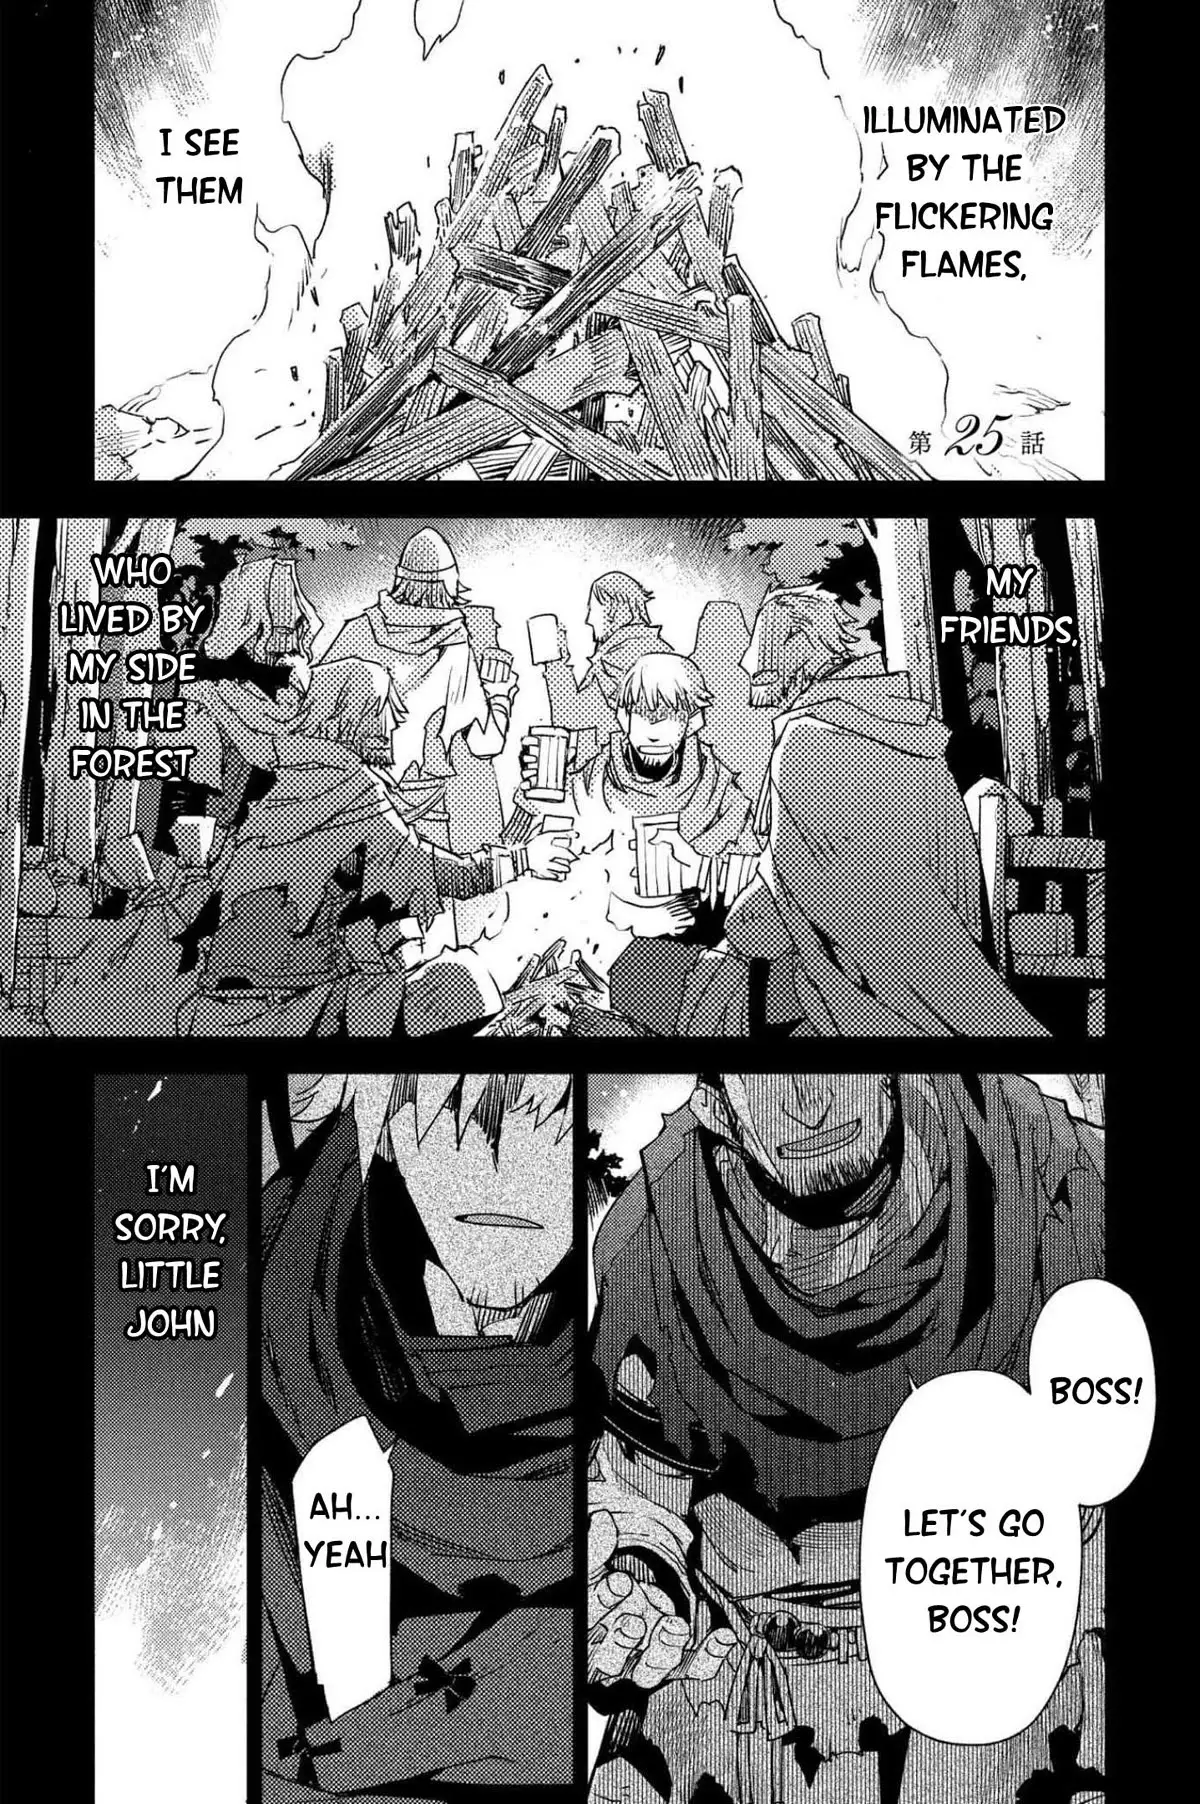 Fate/grand Order: Epic Of Remnant - Subspecies Singularity Iv: Taboo Advent Salem: Salem Of Heresy - 25 page 1-6c37e577